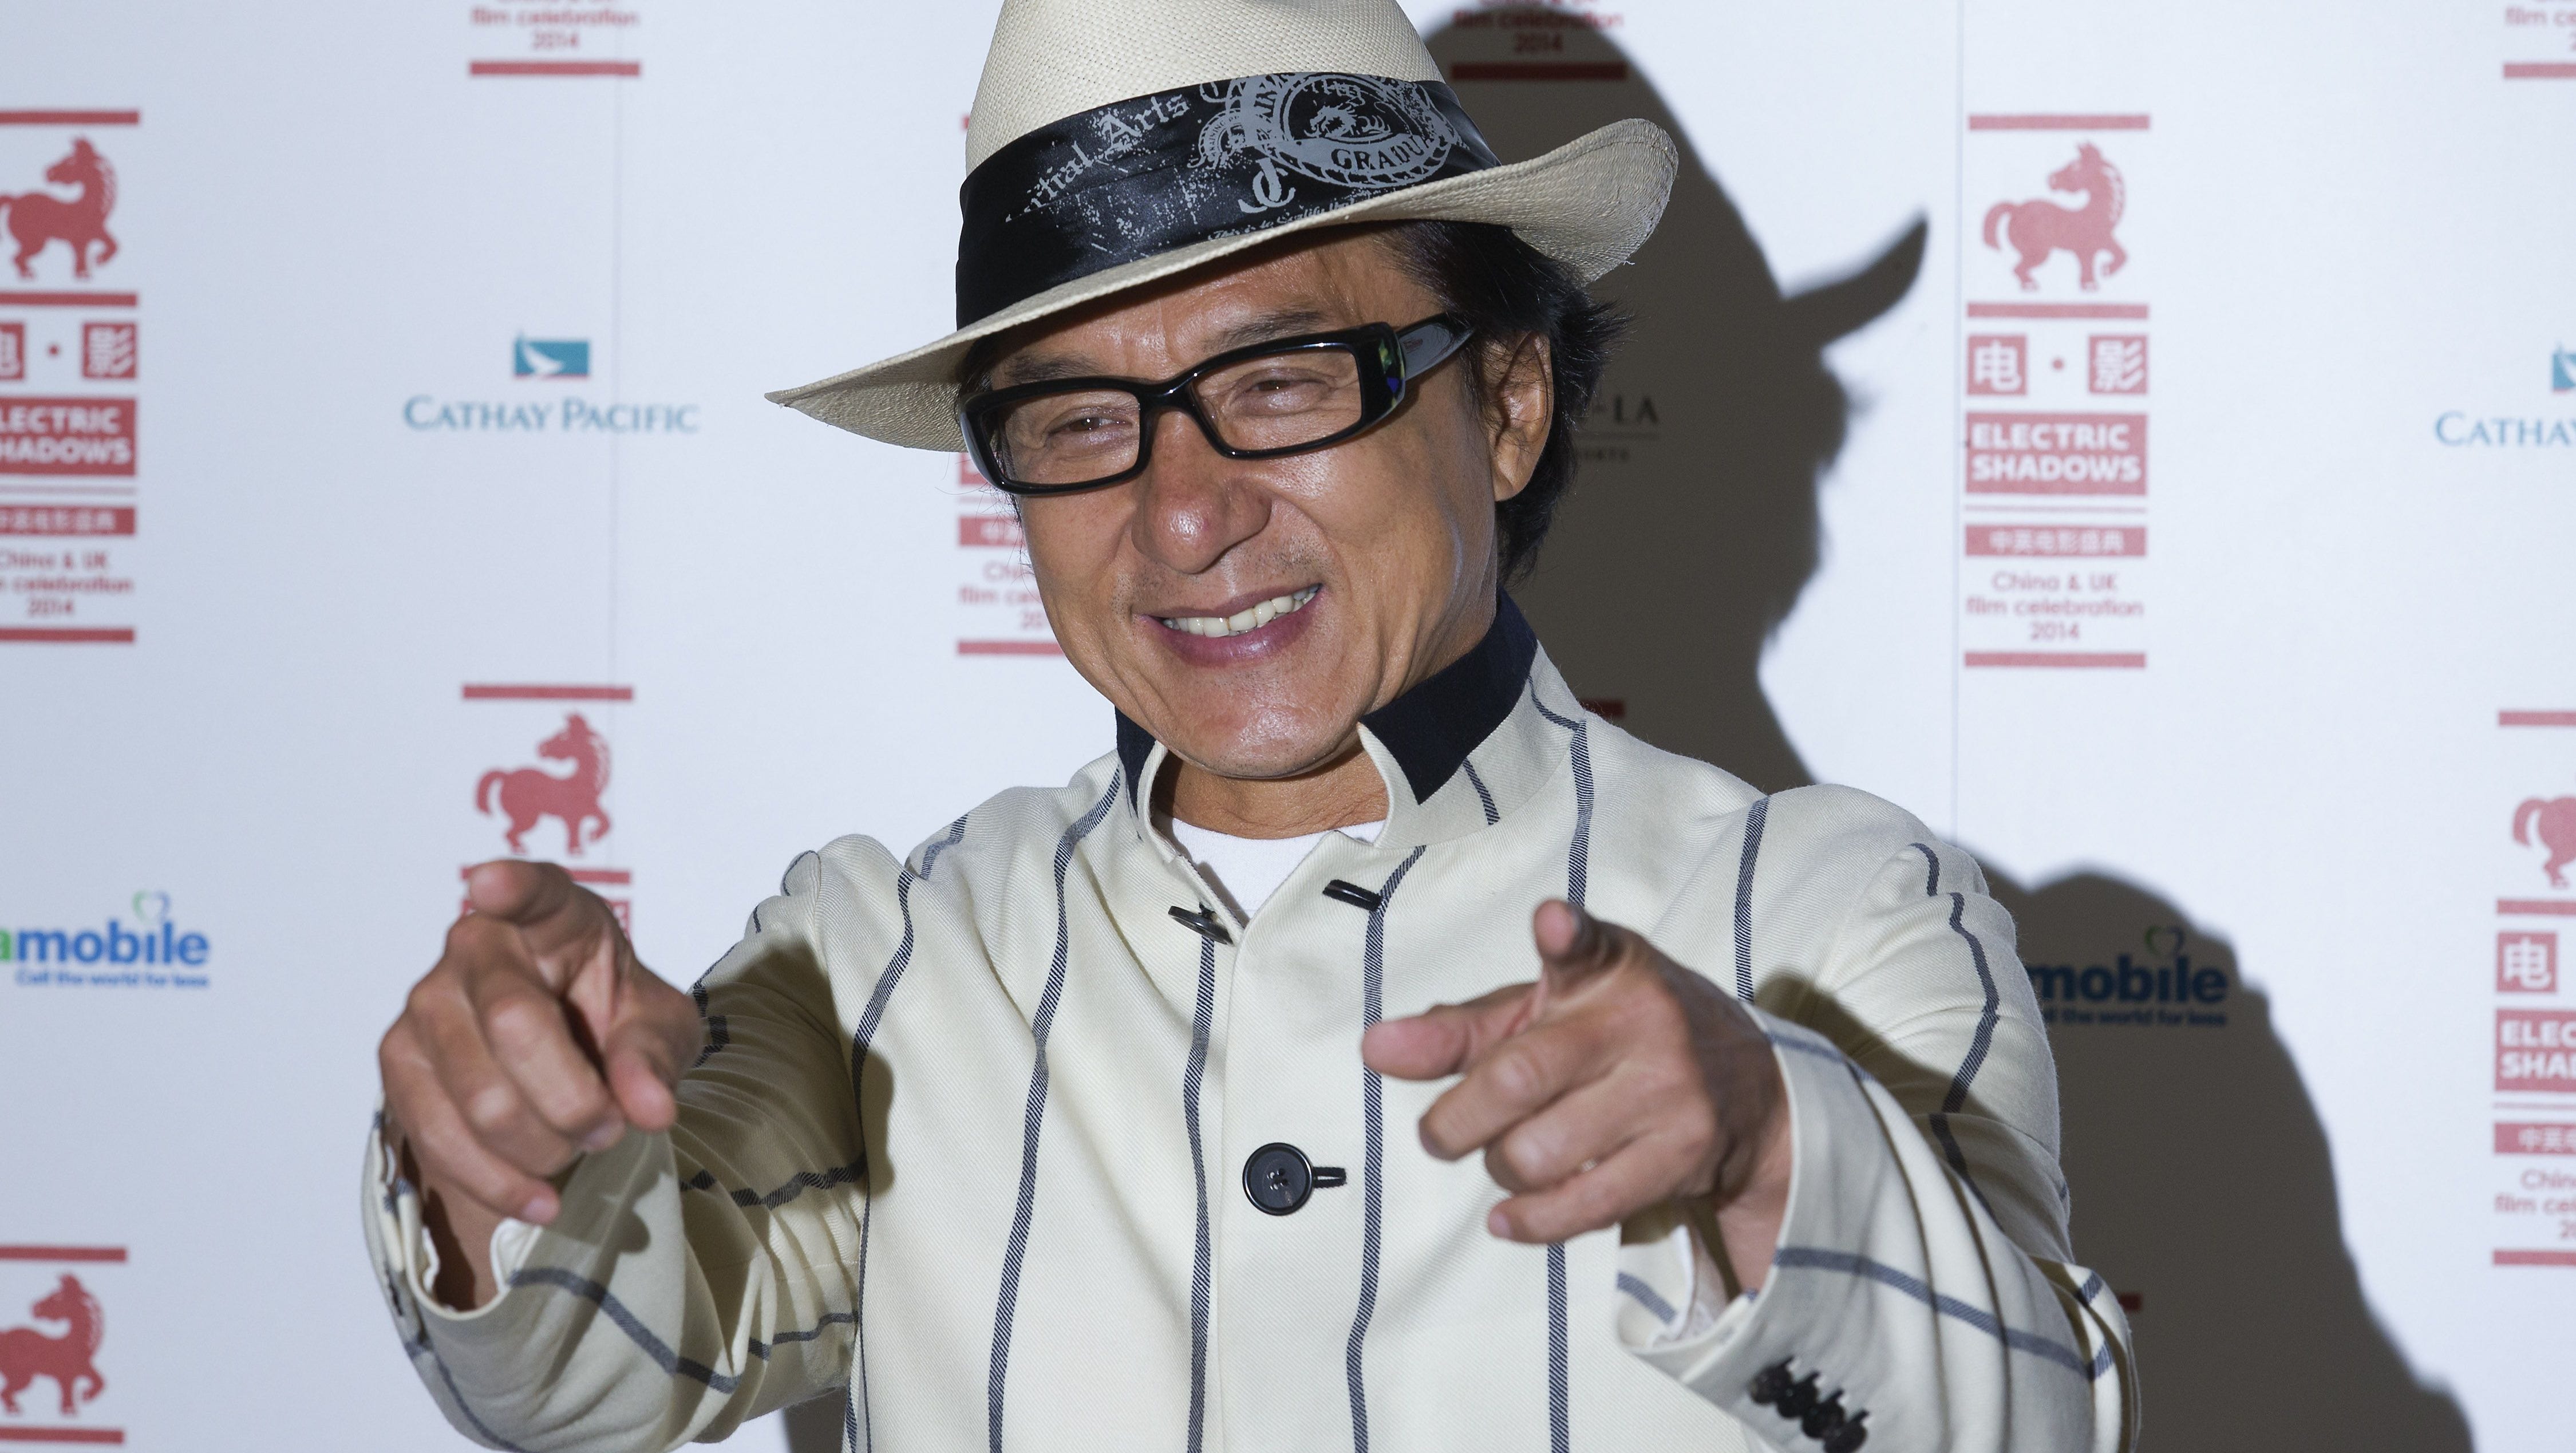 where did jackie chan film in london